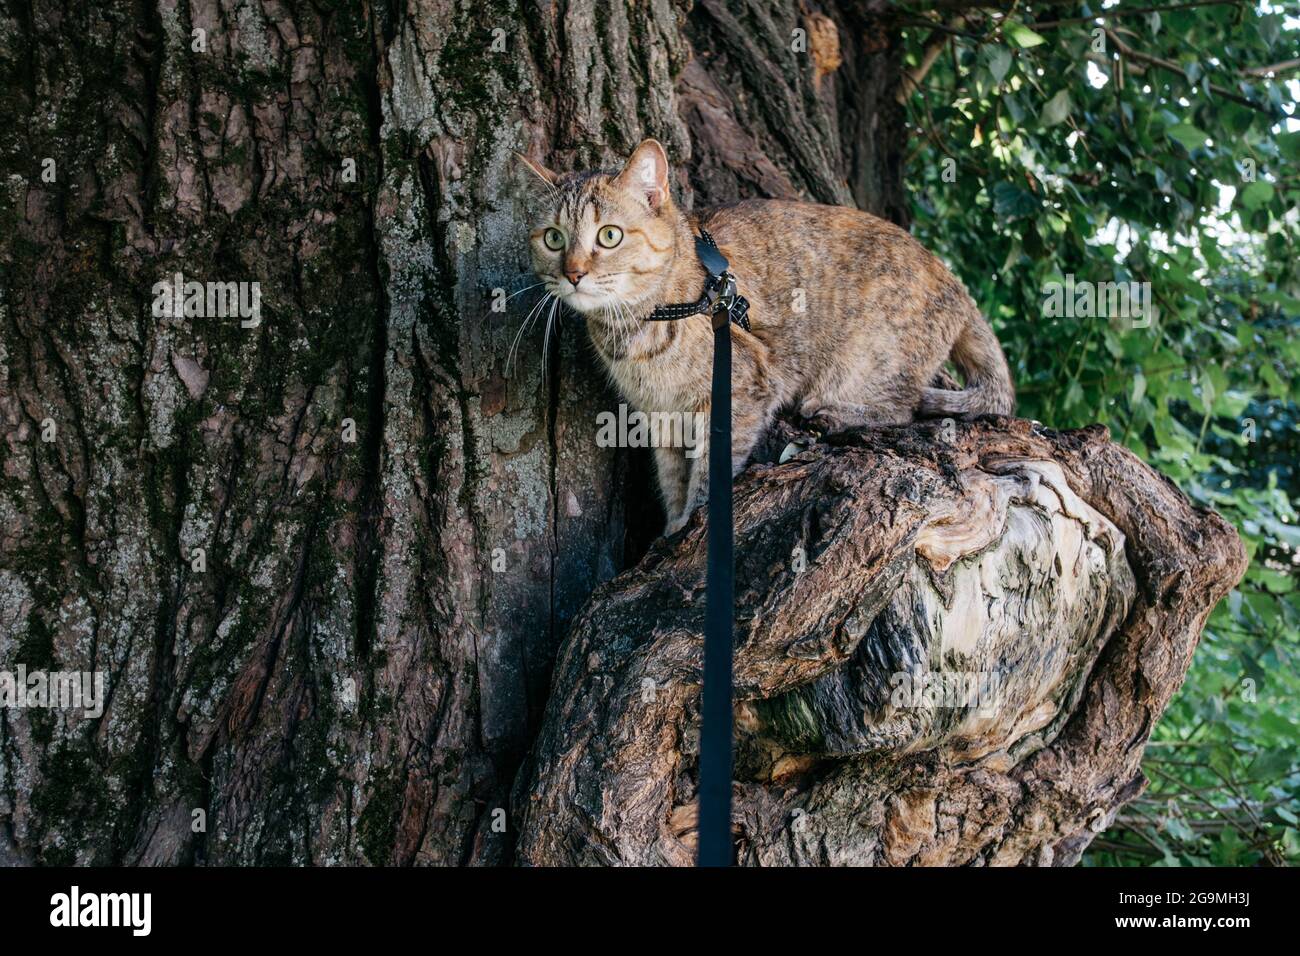 Cat in a collar on a leash climbs a tree. Stock Photo